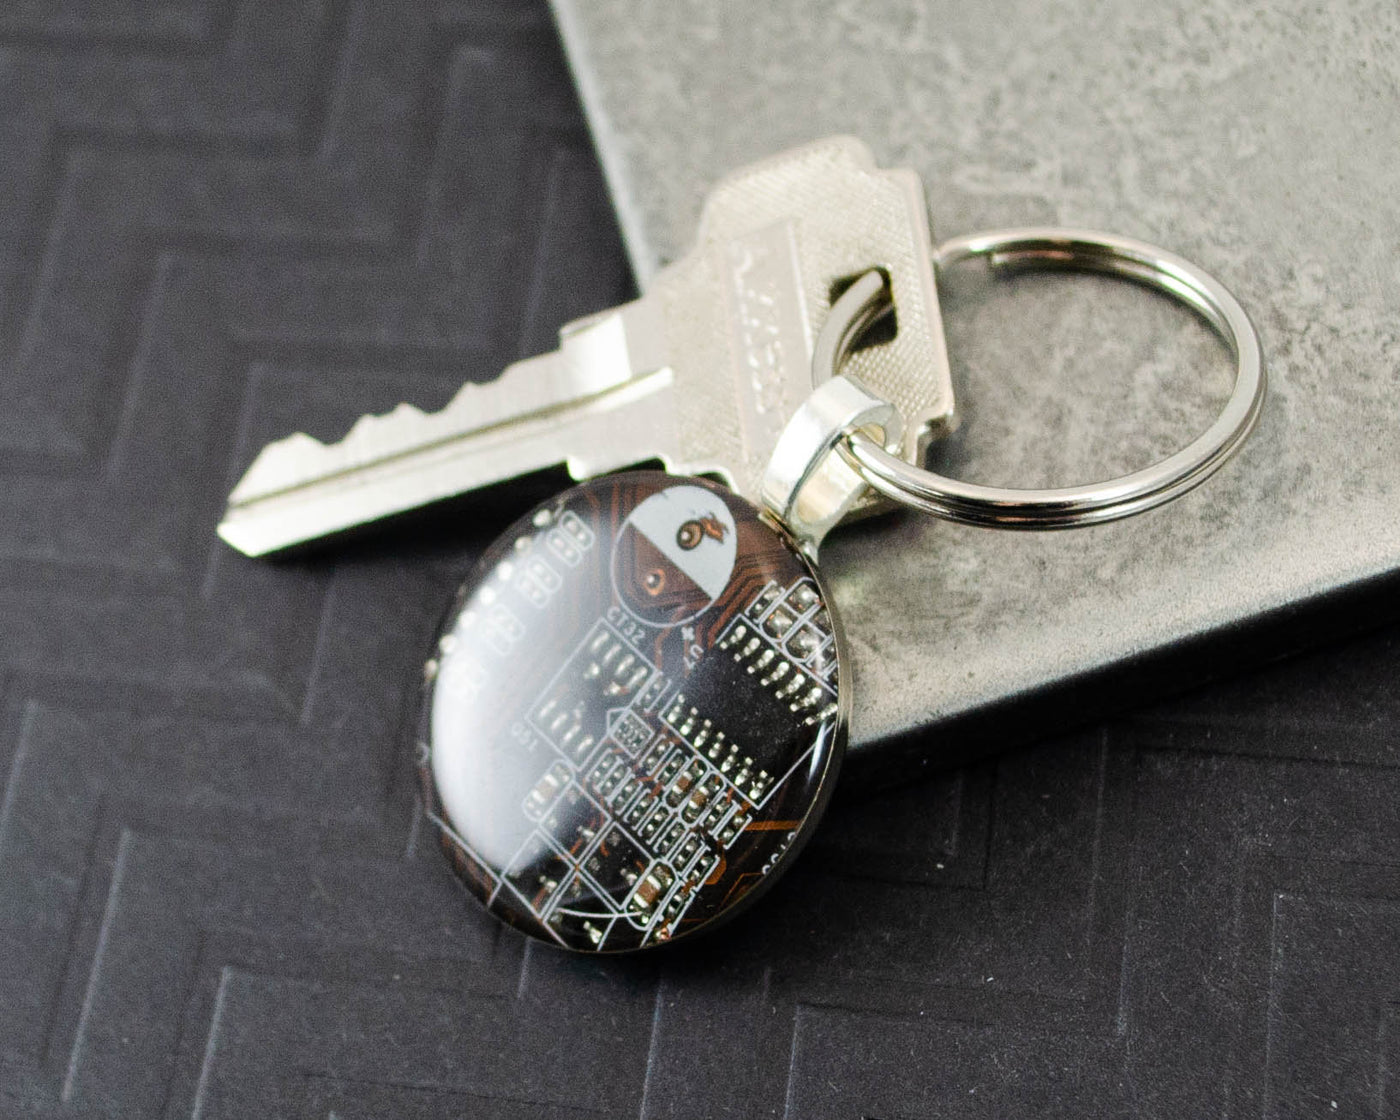 Circuit Board Keychain, Computer Engineer Gift, Fathers Day Gift, Wearable Technology, Information Tech, Black Key Fob, Geek Gift for Him